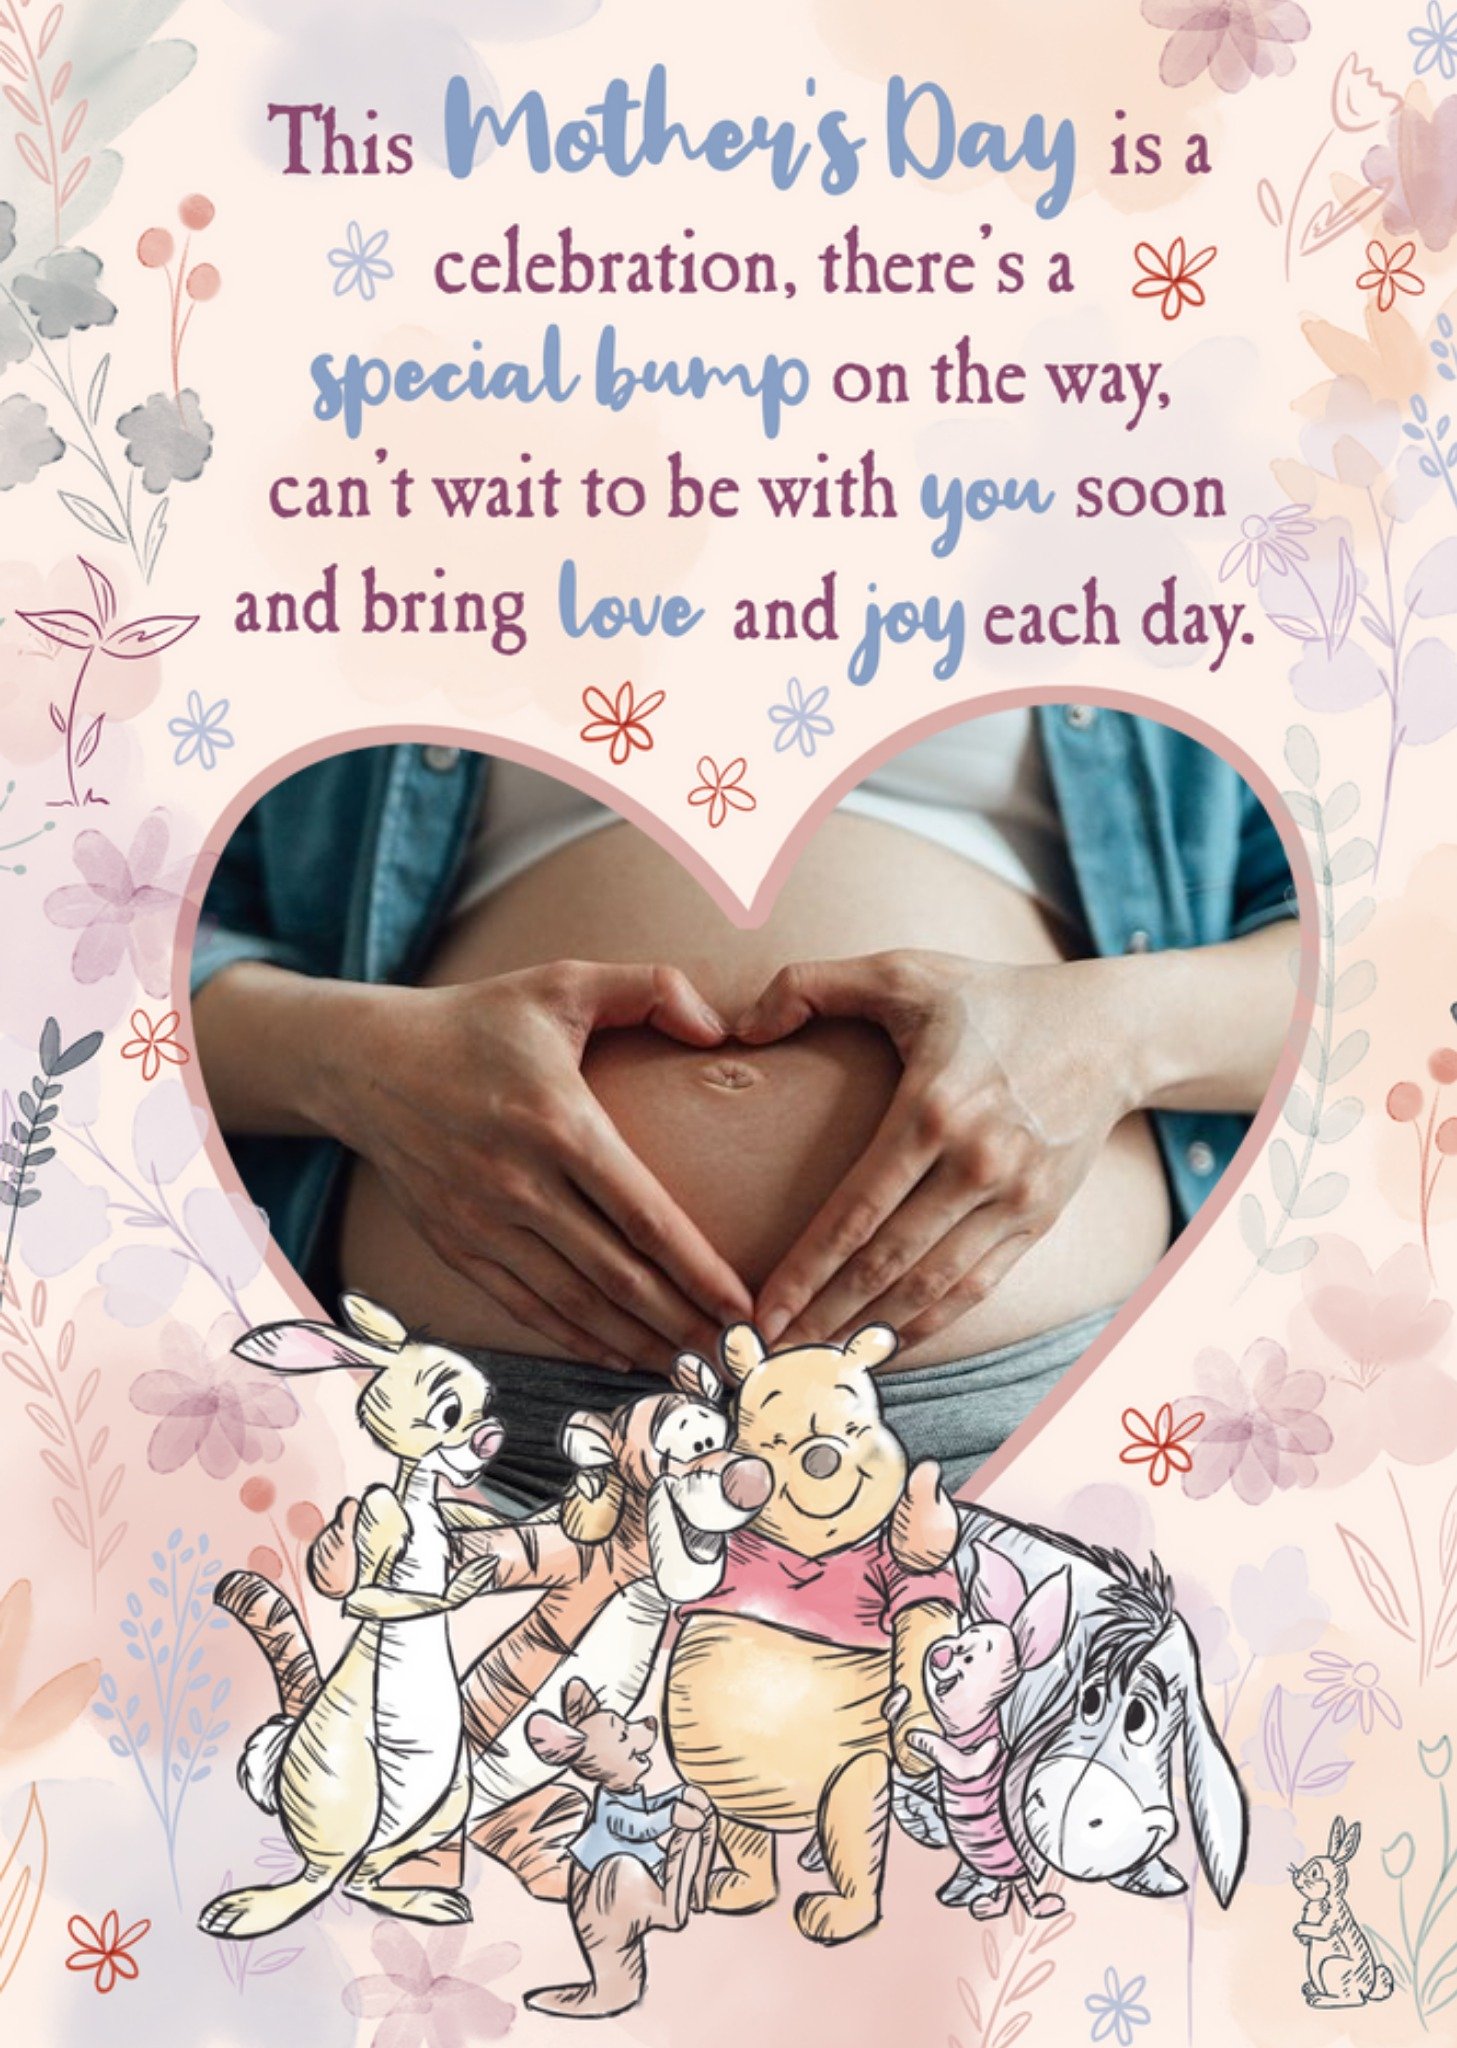 Winnie The Pooh Verse Photo Upload Special Bump Mother's Day Card Ecard